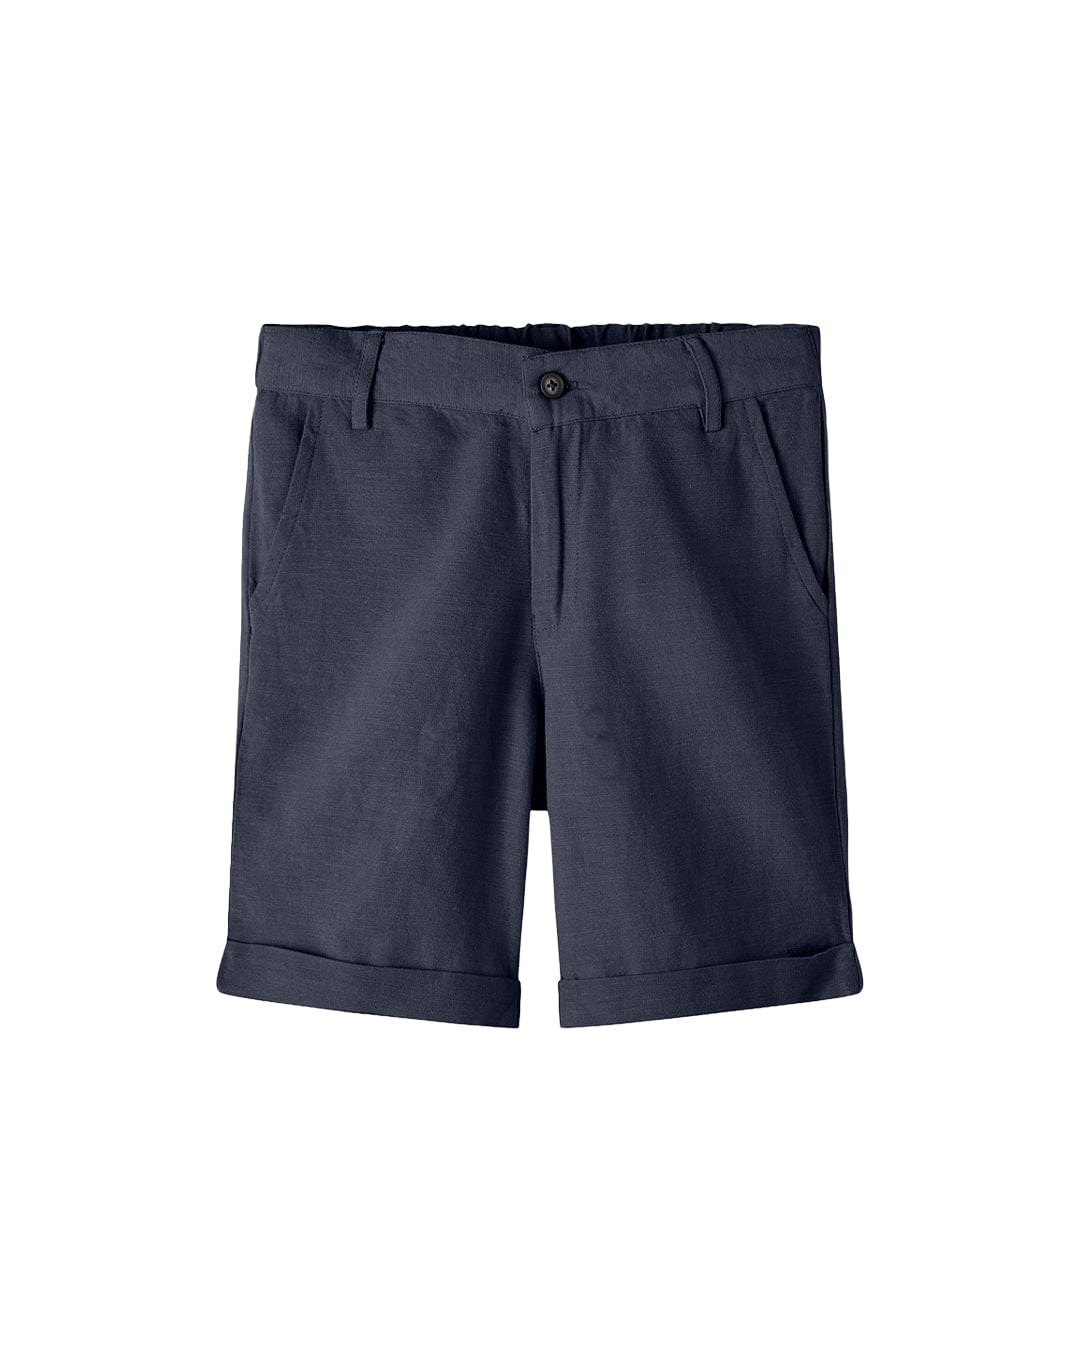 Name It Shorts Name It Faher Blue Shorts